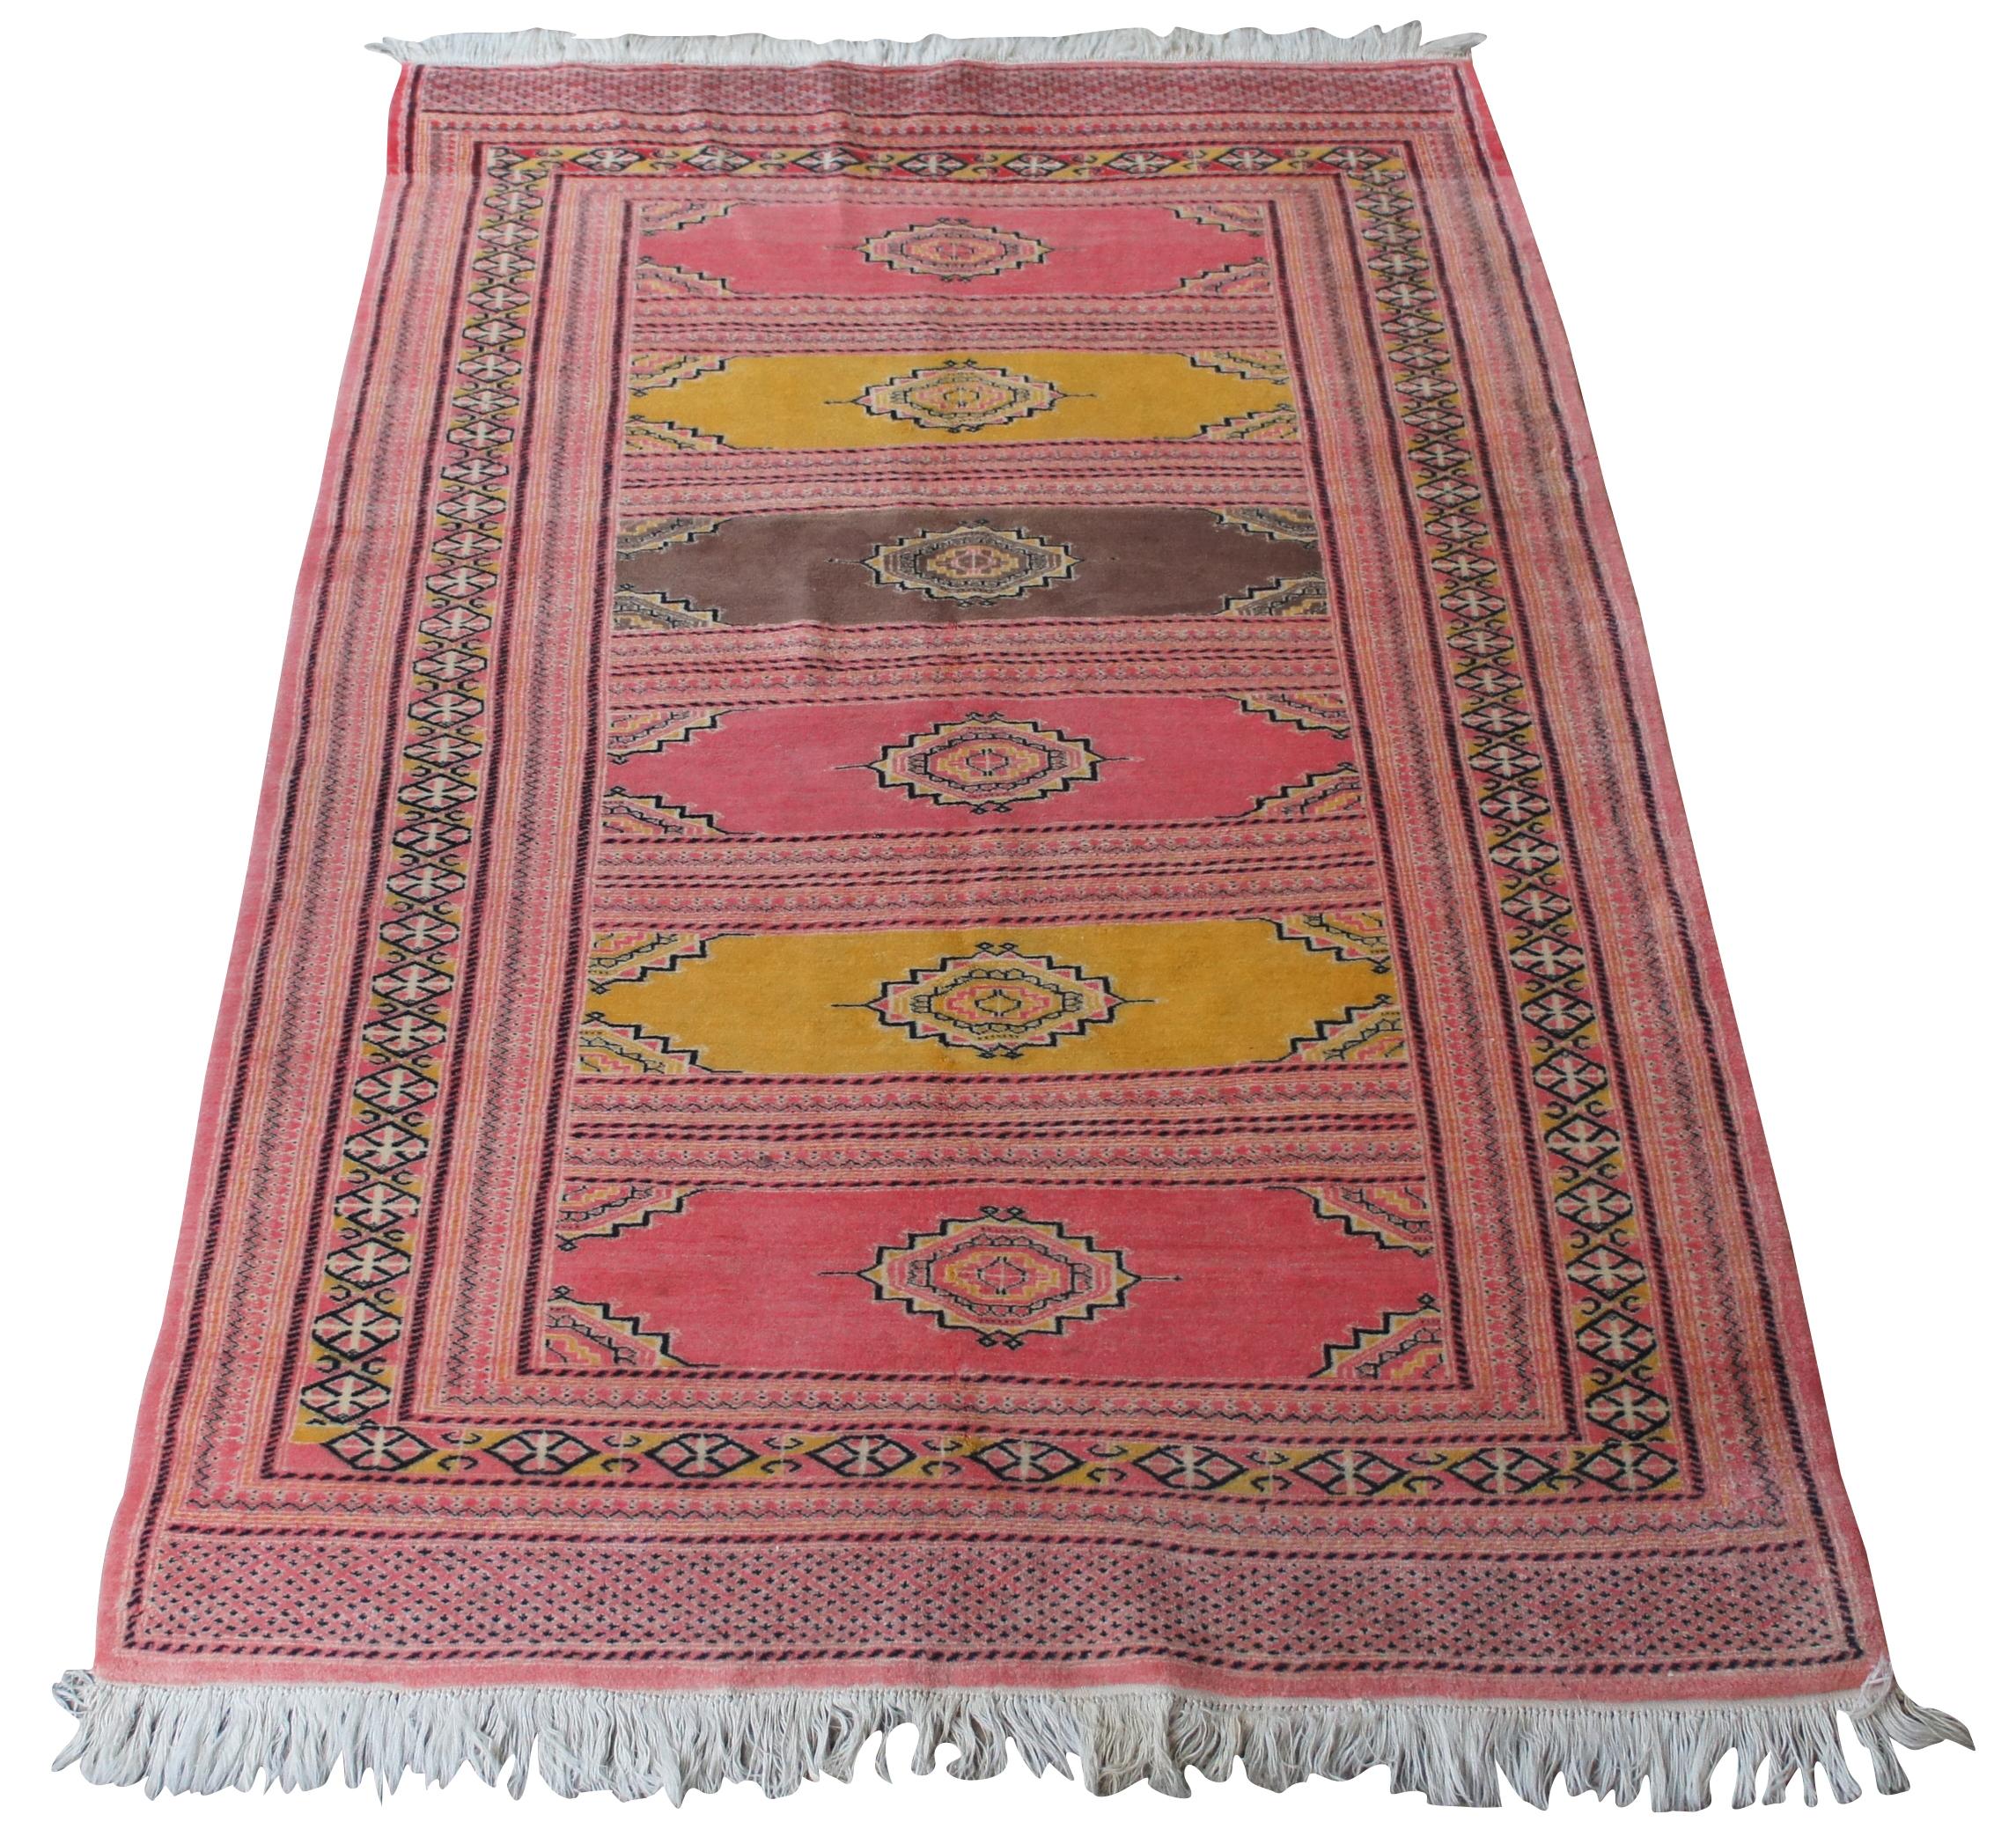 A stunning mid 20th century pakistani prayer rug with a pink color pallette containing a pattern of six niches designed after the mihrab of a mosque. Features shades of pink, yellow, brown and black. 

Provenance: Estate of Carol Levitan and Jesse